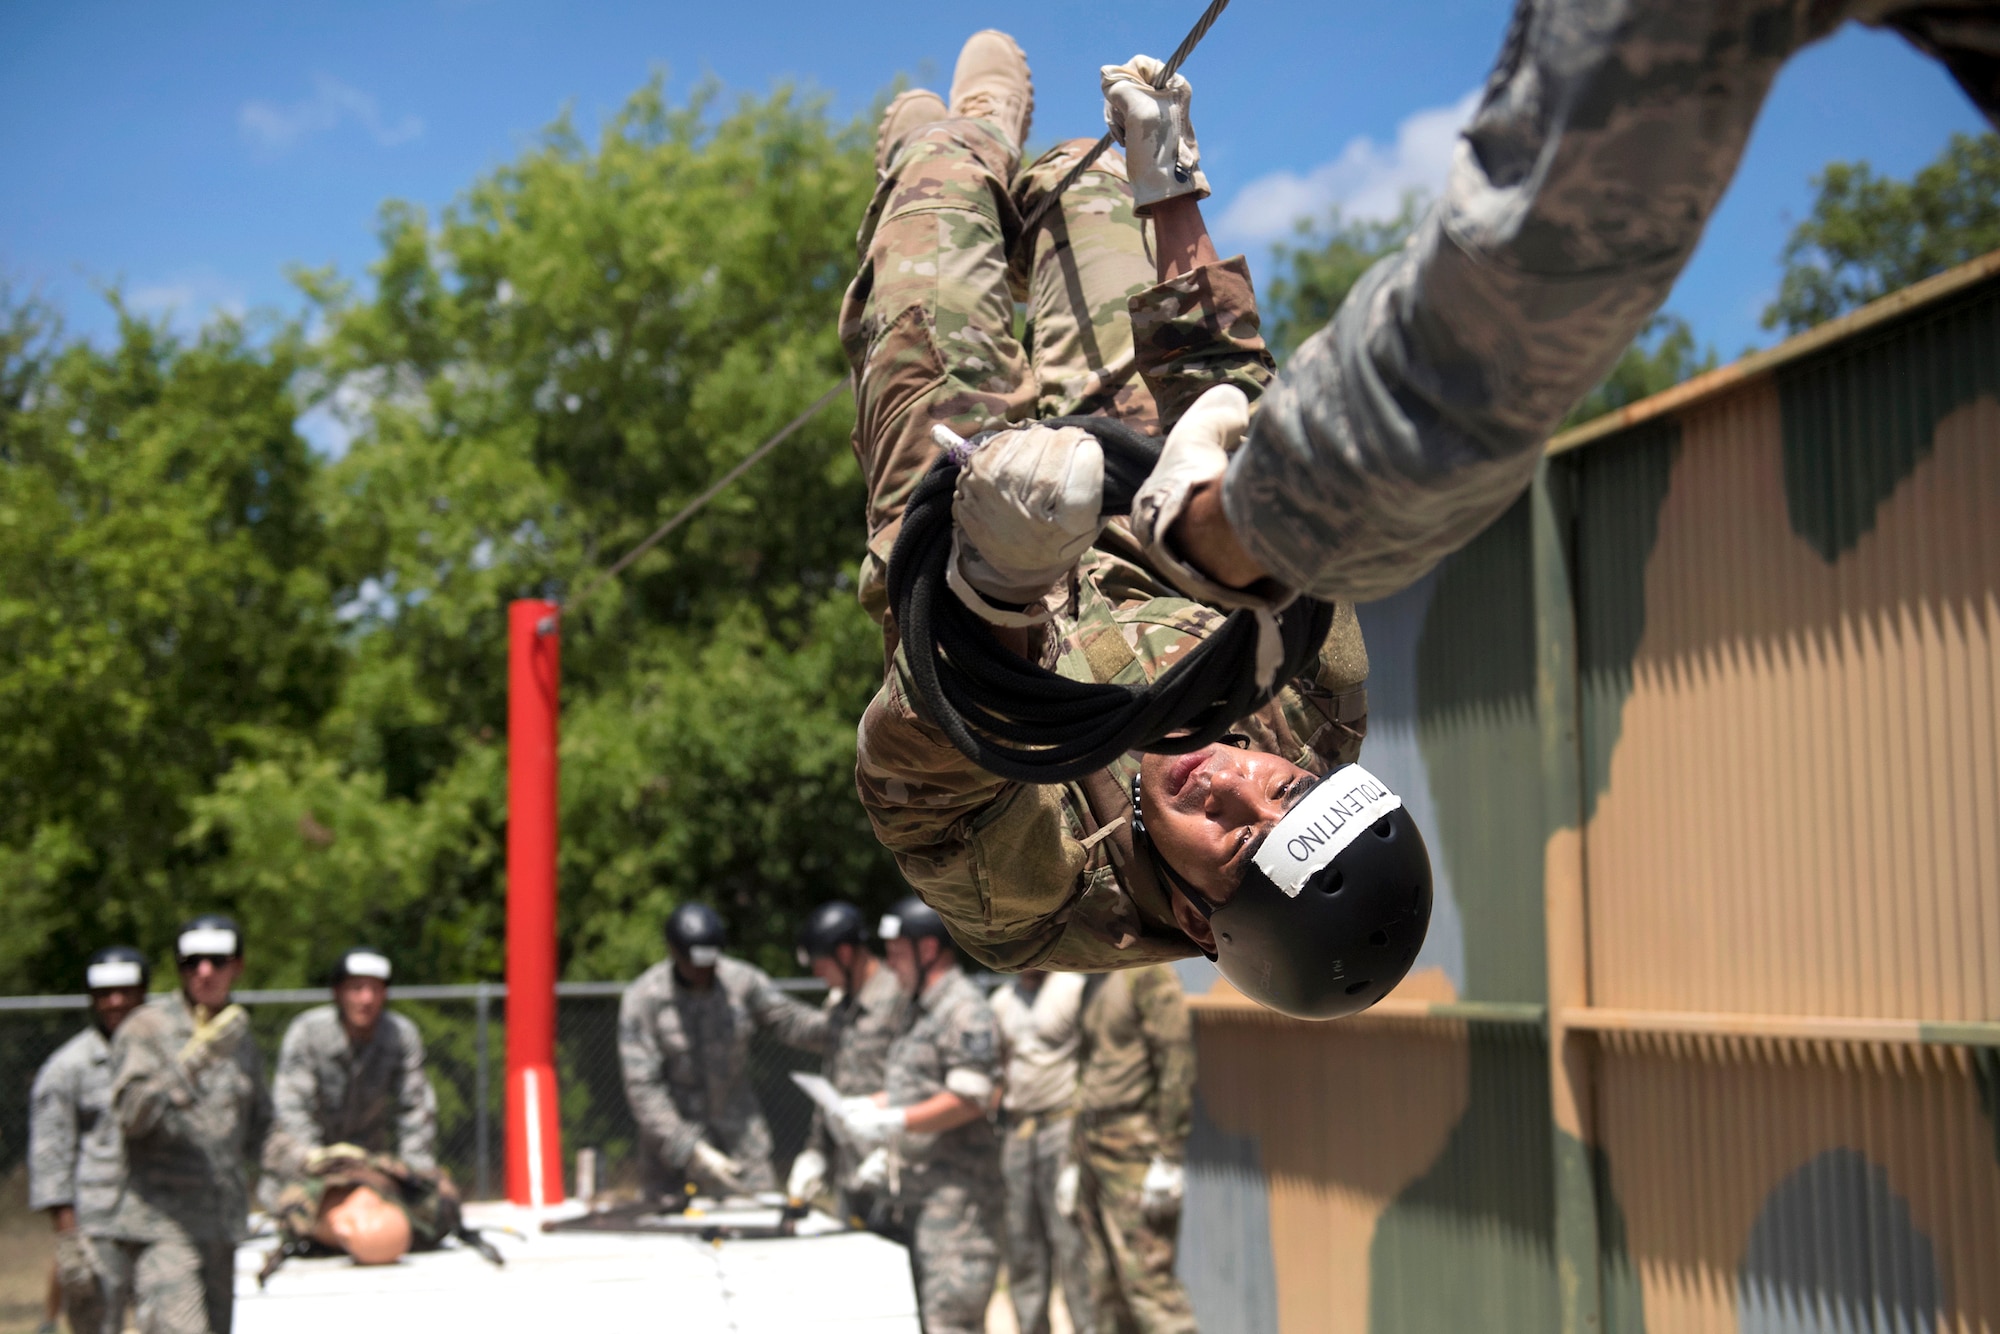 An airman navigates along a rope while upside-down during an obstacle course.